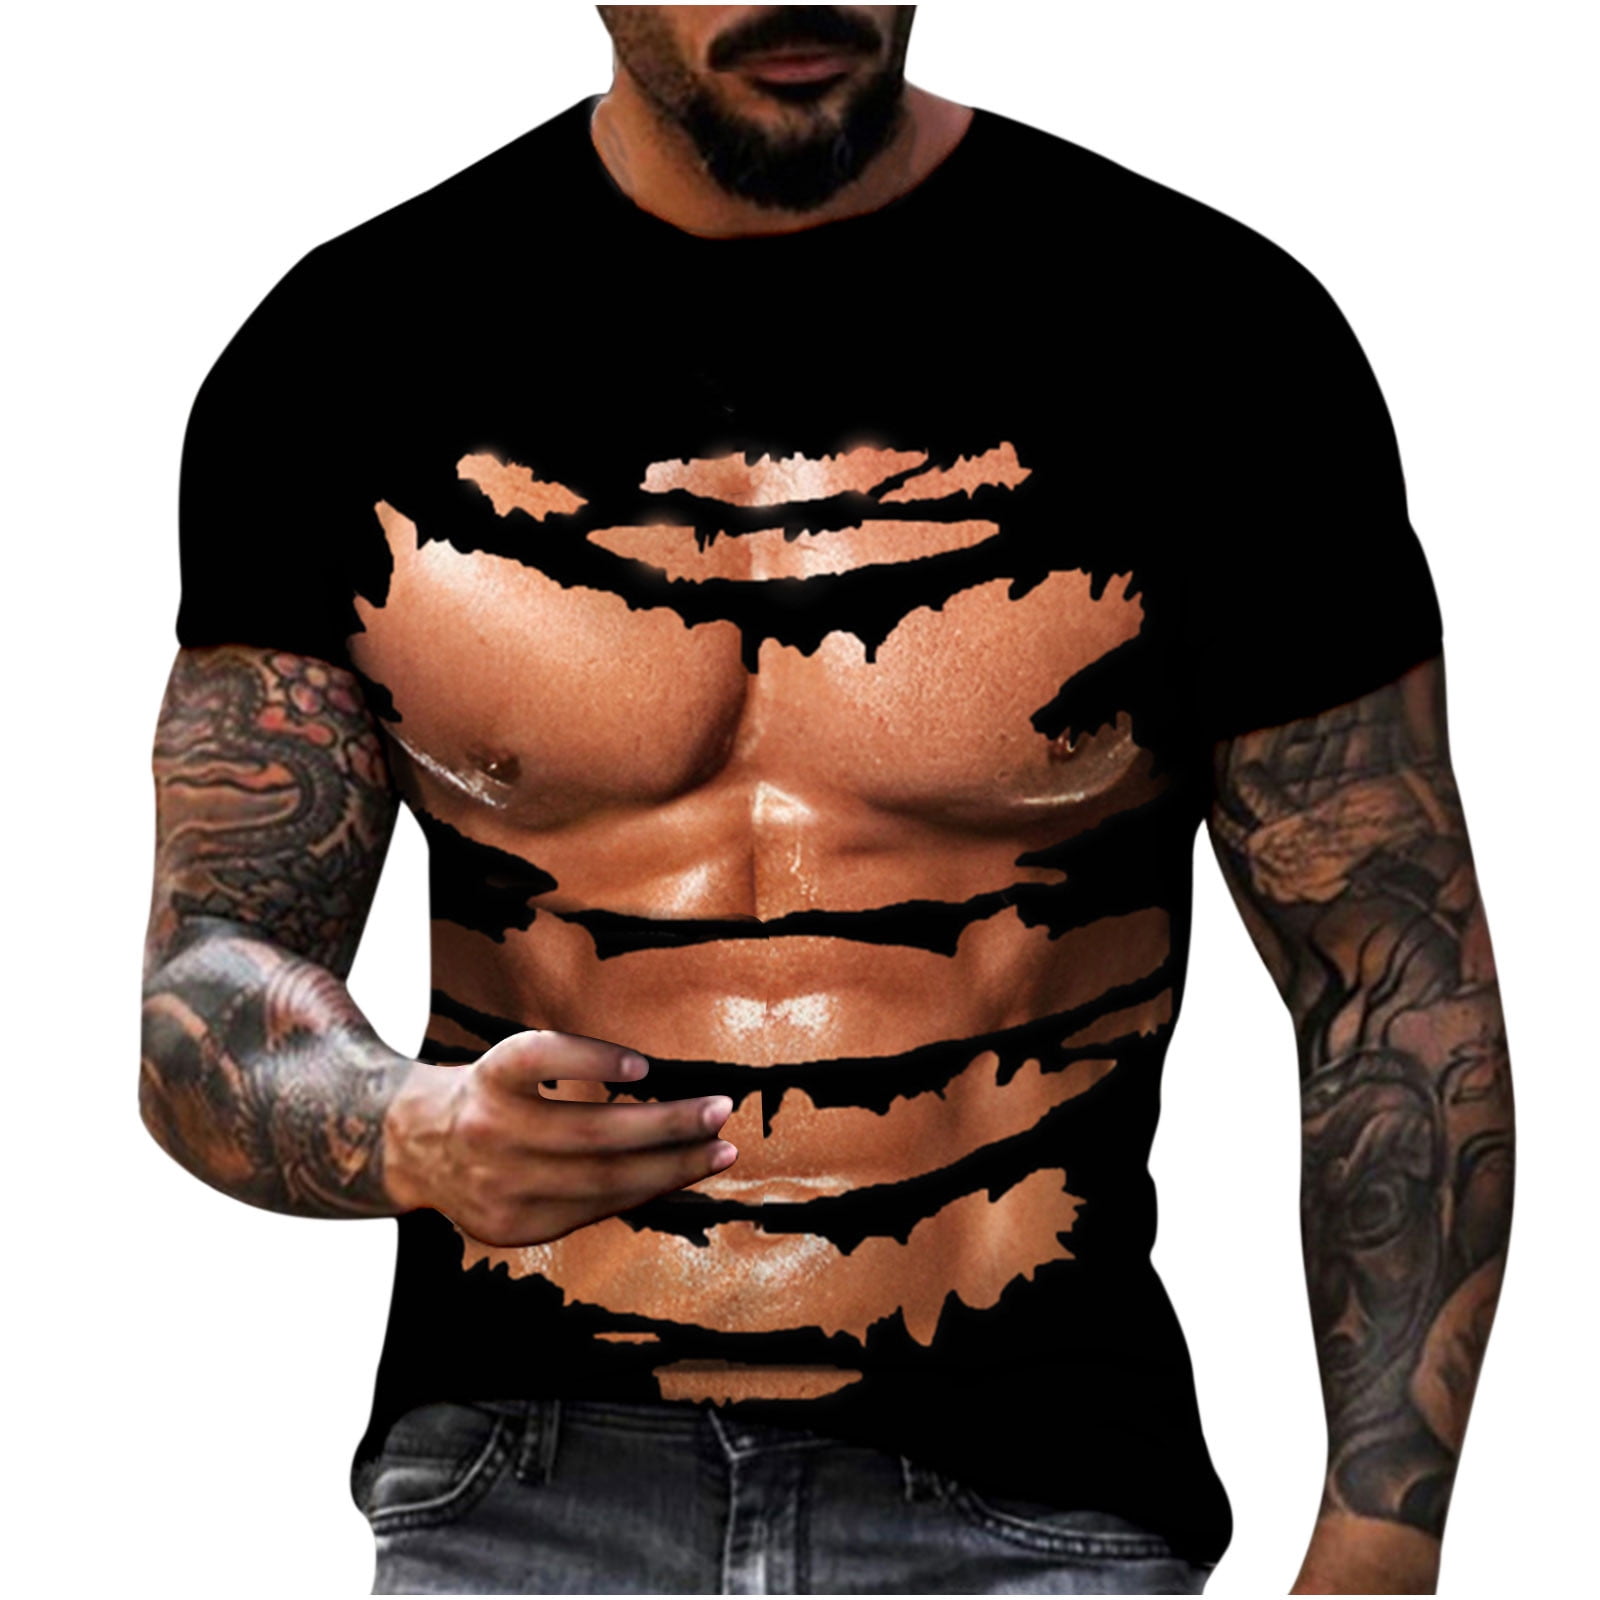 Ripped Muscles, six pack, chest T-shirt' Men's Premium Tank Top